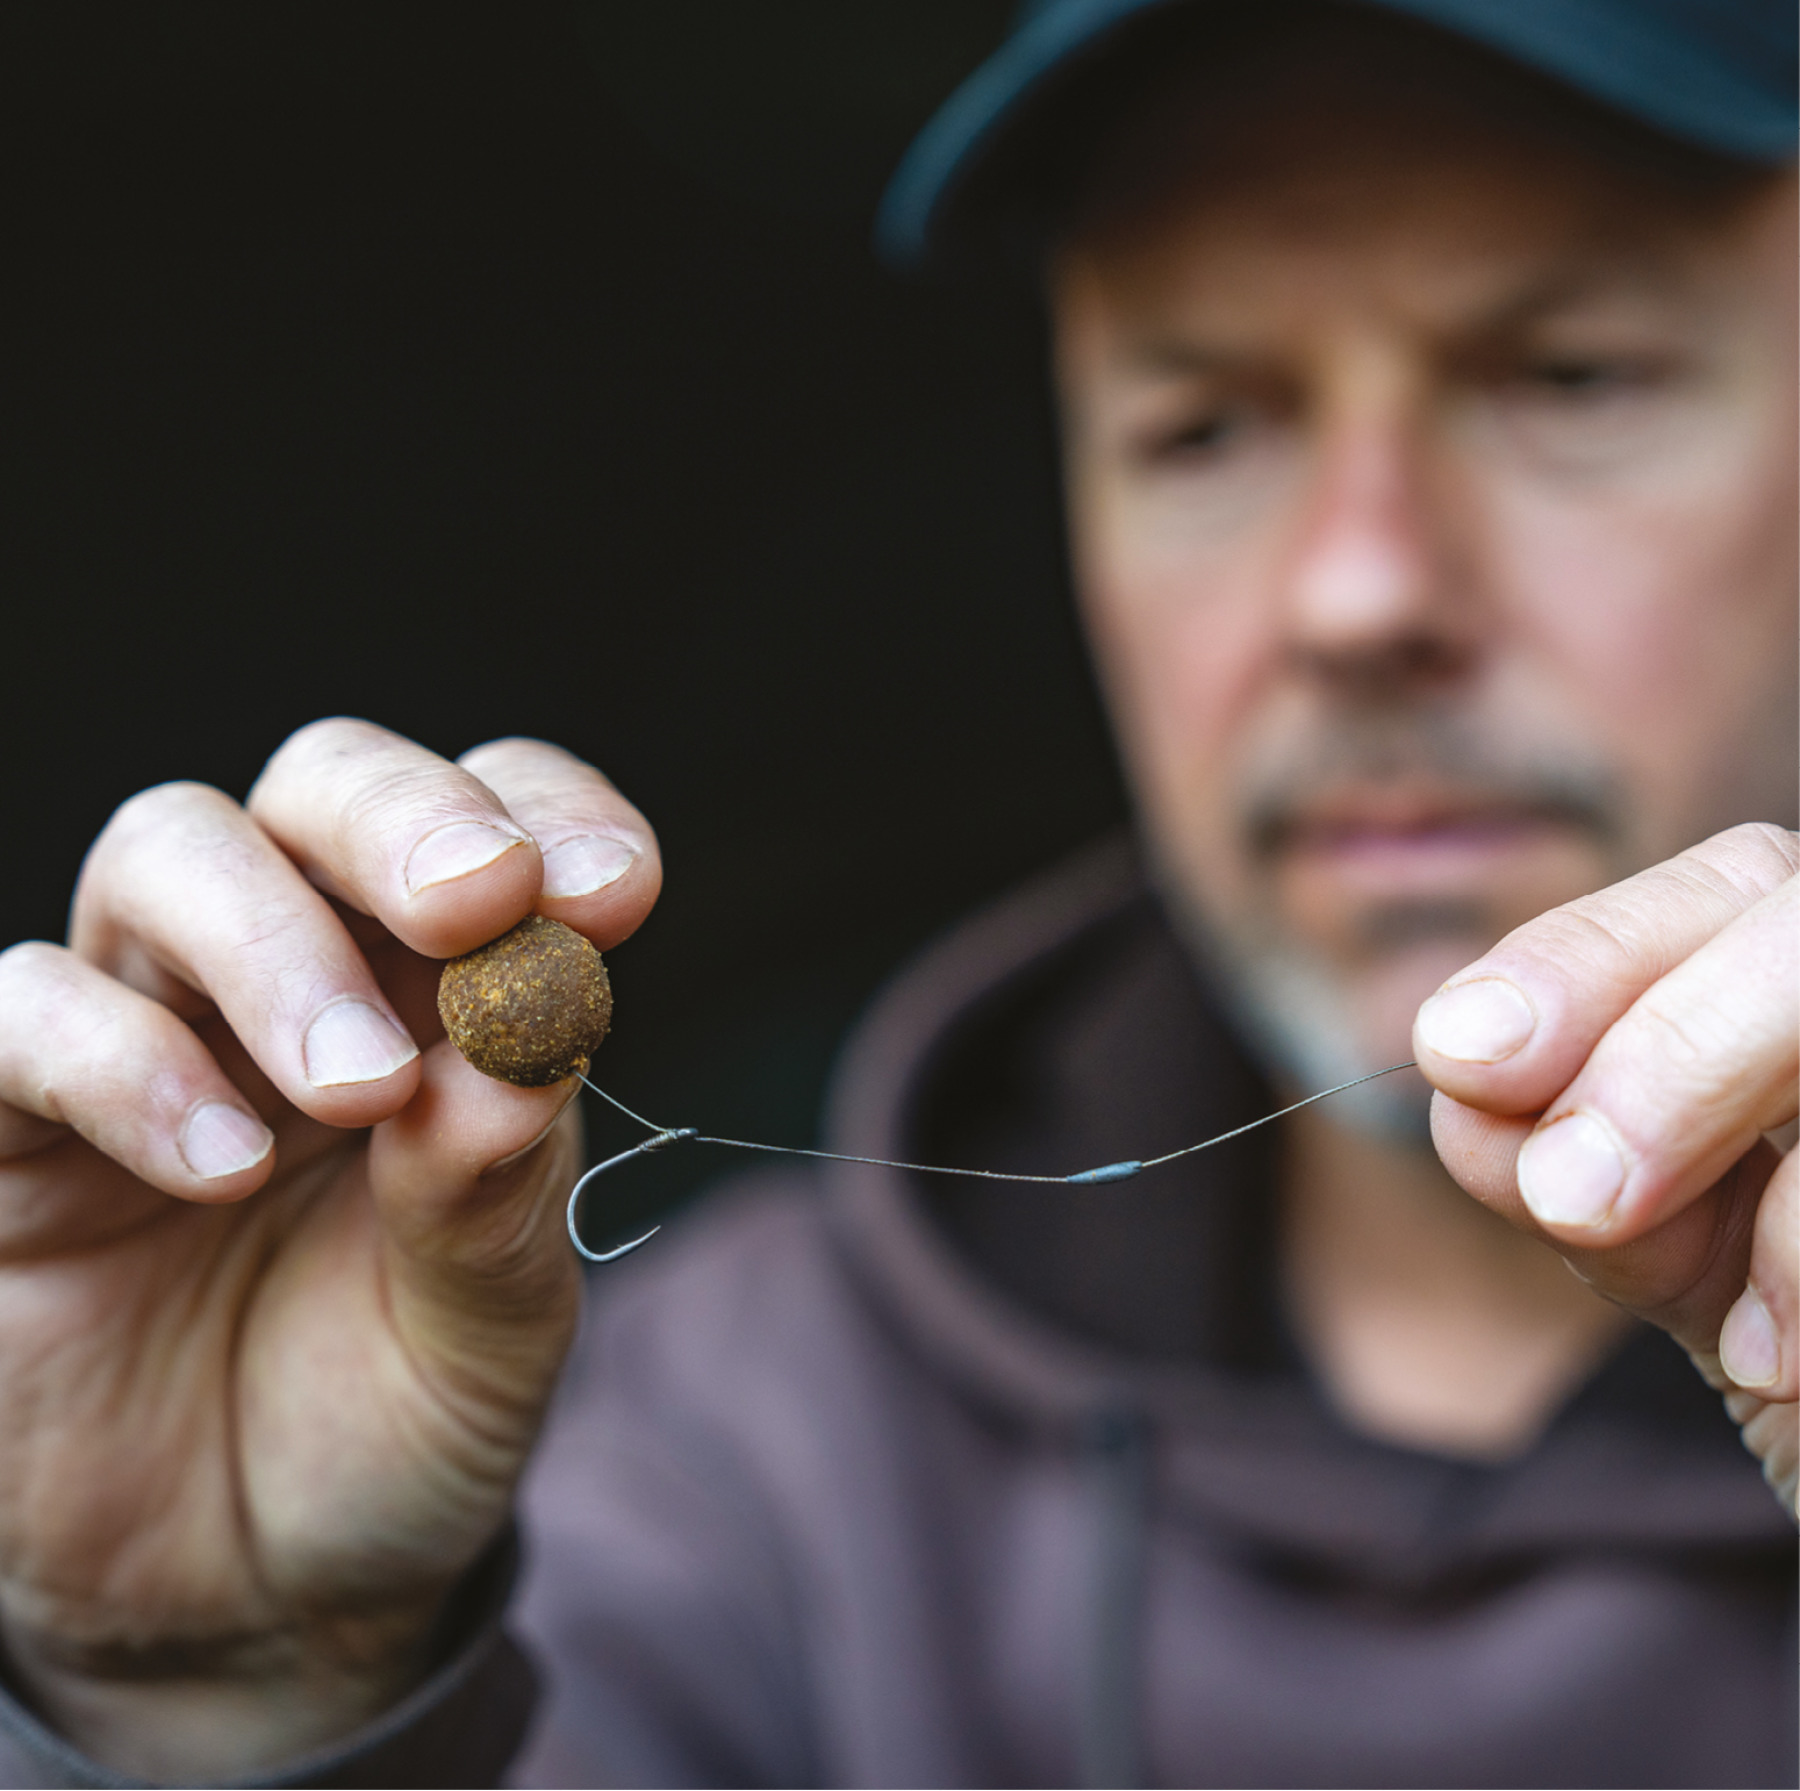 5. And here’s how the hook hangs when the hookbait is lifted.